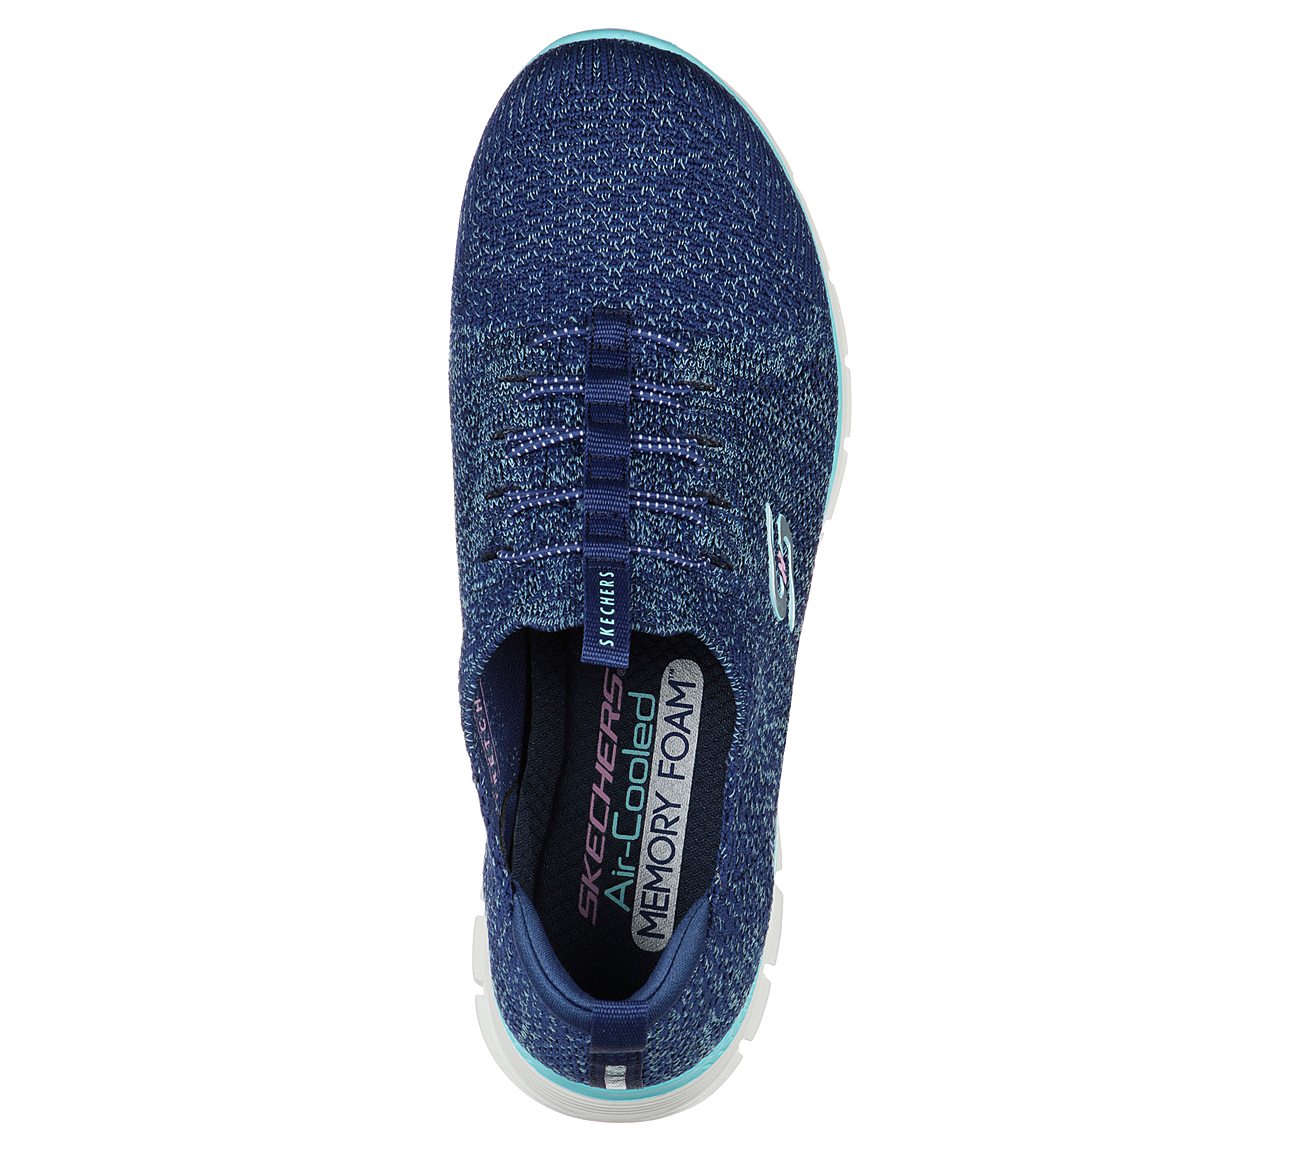 LUMINATE - SHE'S MAGNIFICENT, NAVY/BLUE Footwear Top View